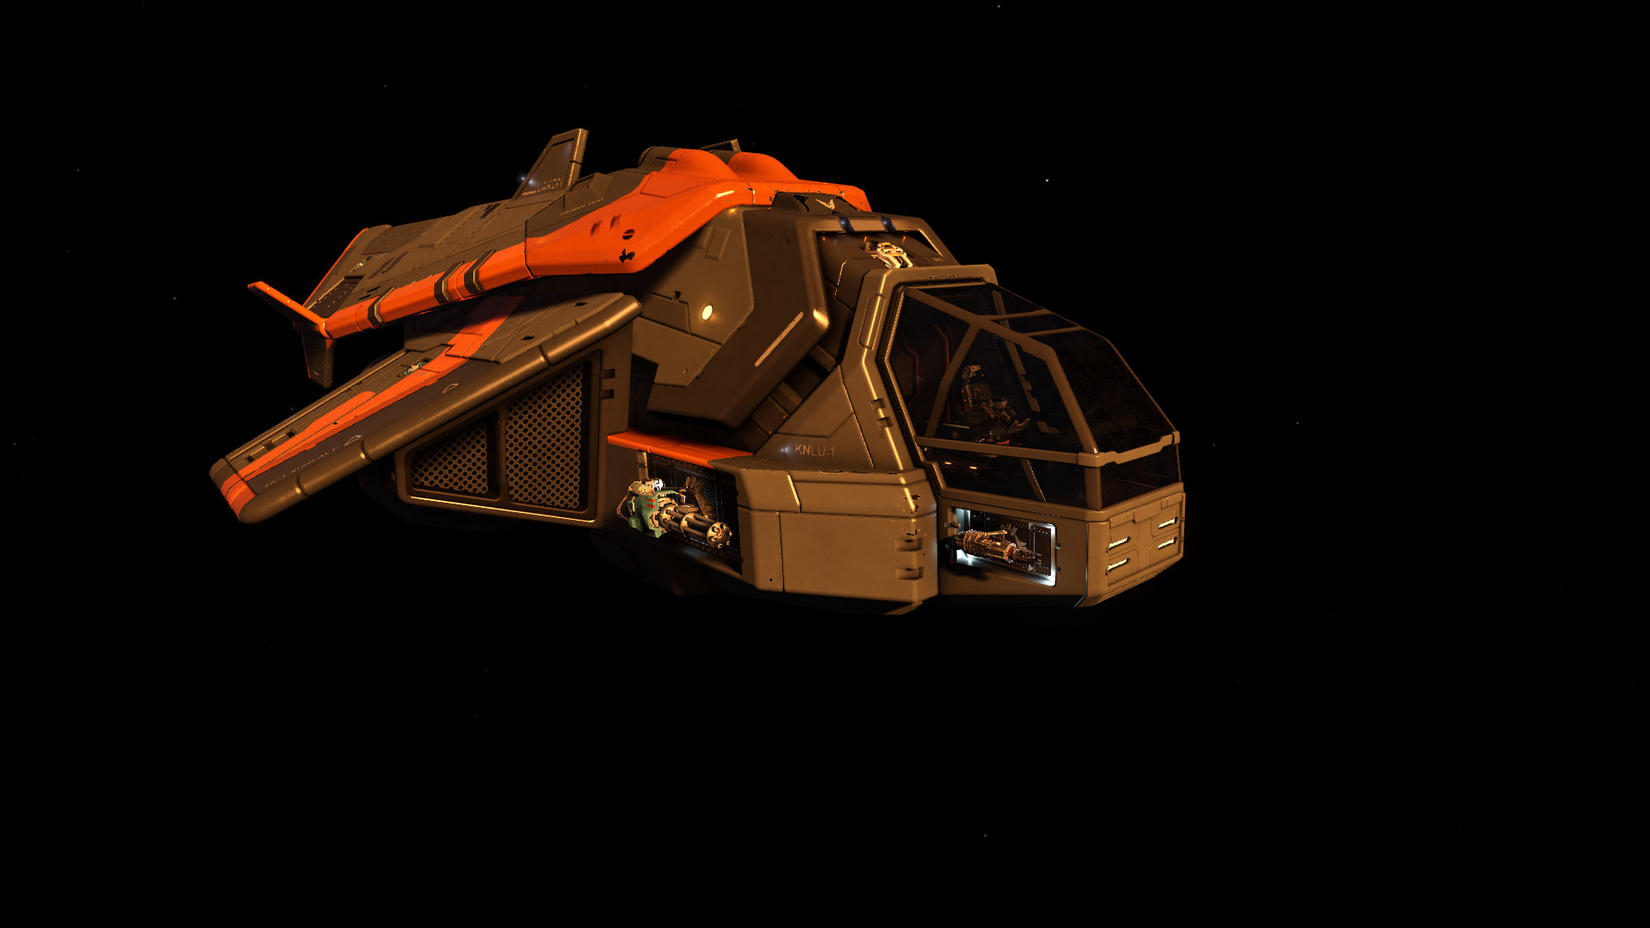 Image of the Diamondback Scout from Elite Dangerous